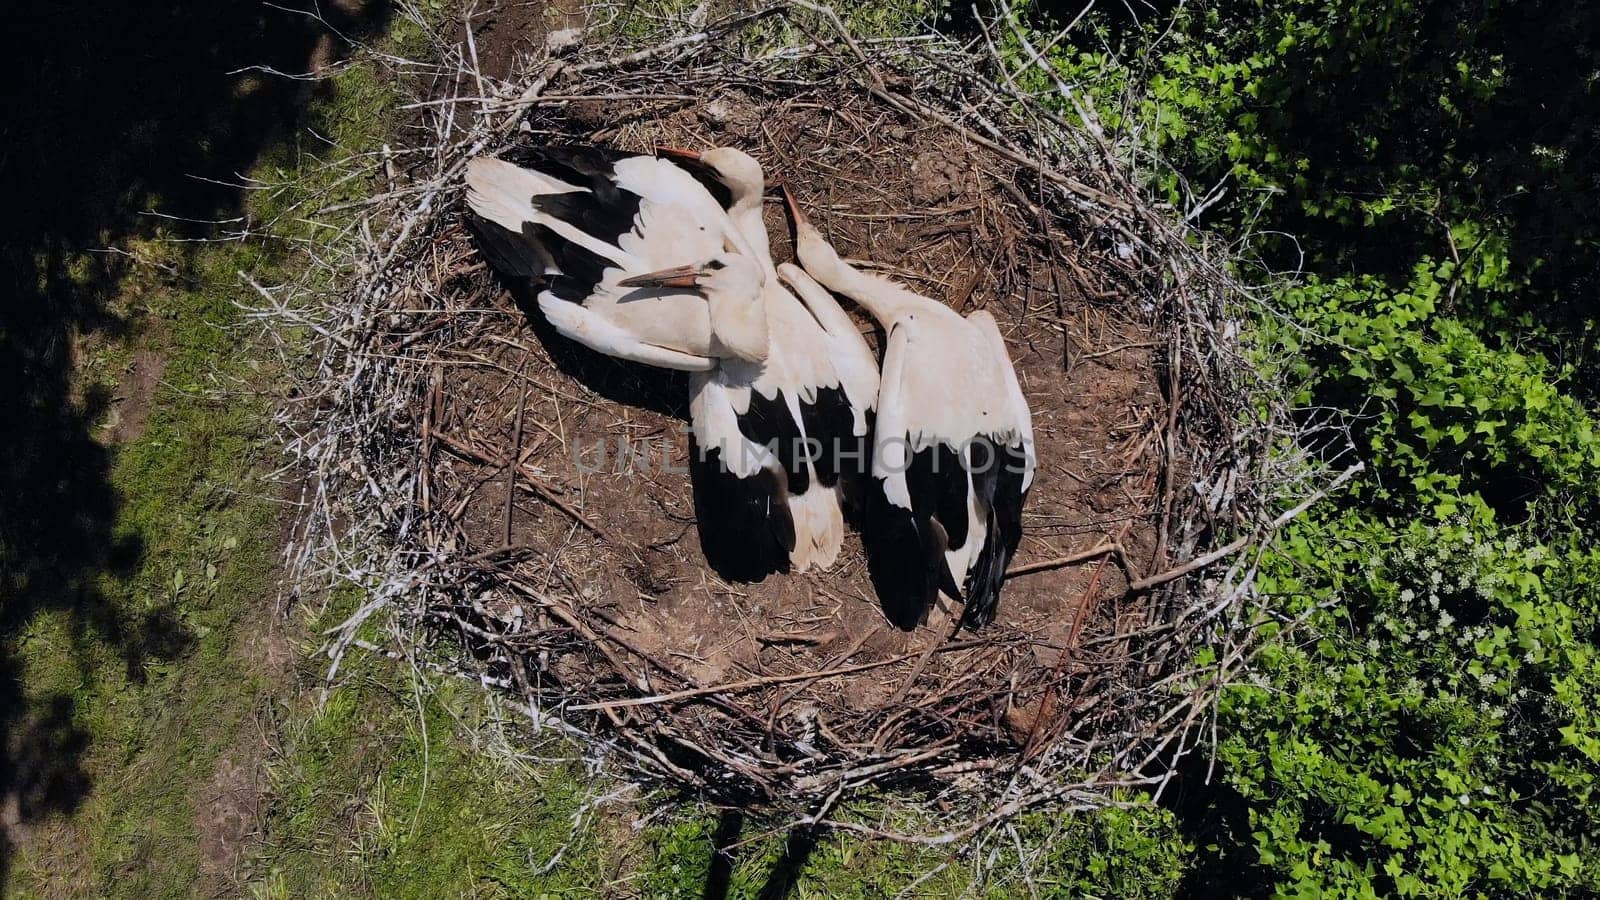 Storks nest with chicks in Russia. Drone view. by DovidPro